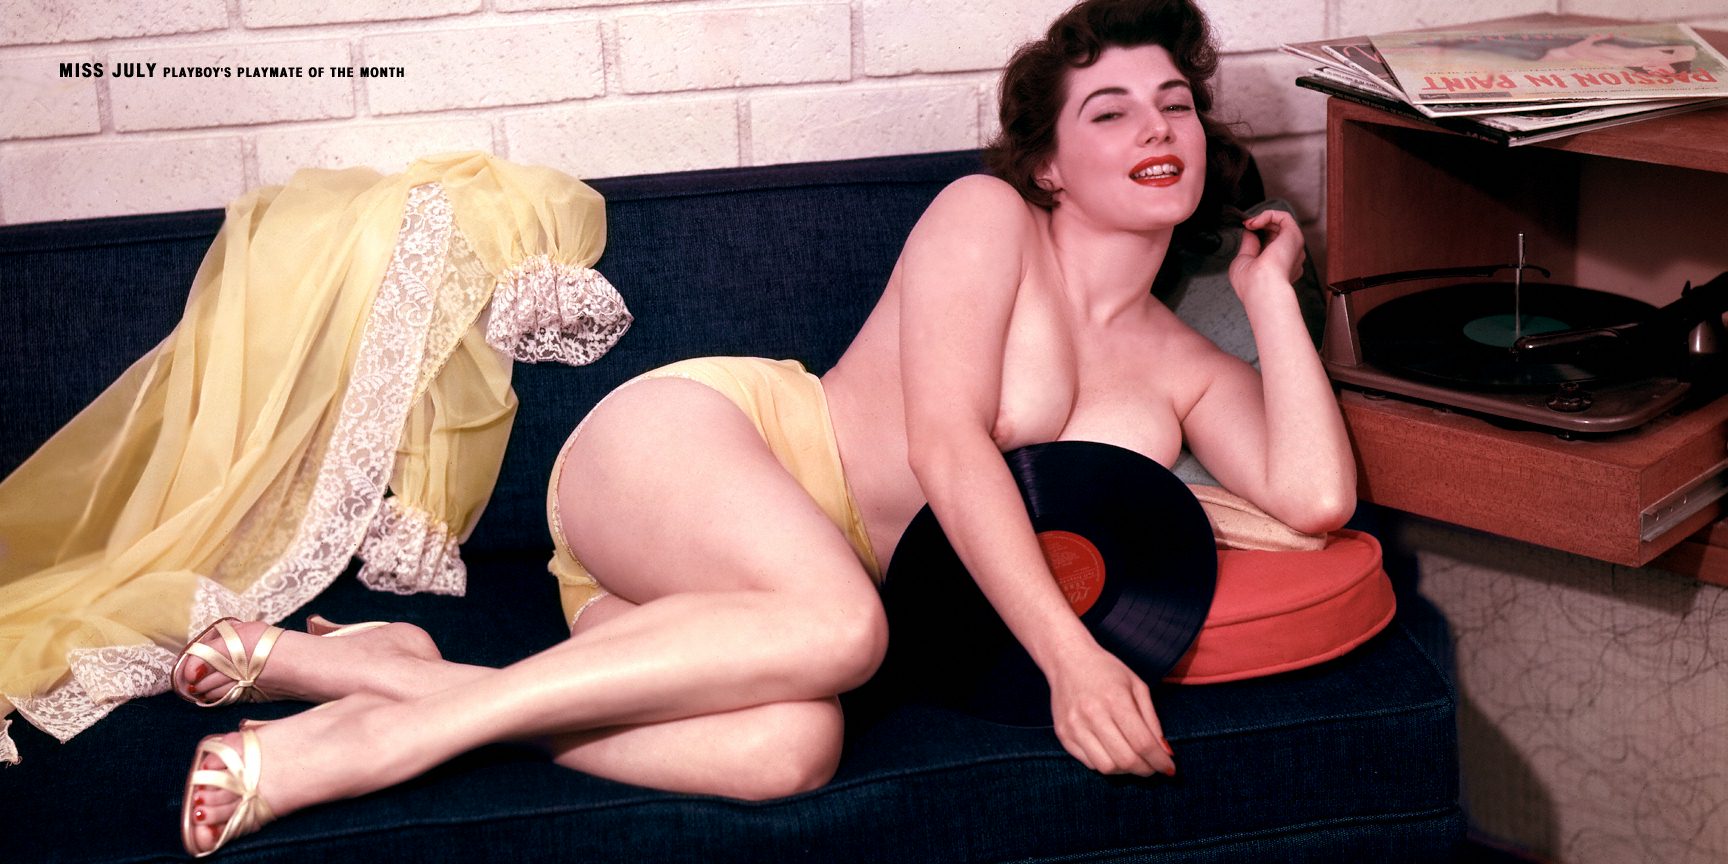  Playboy Playmate Of The Month1957.07.01 Jean Jani 